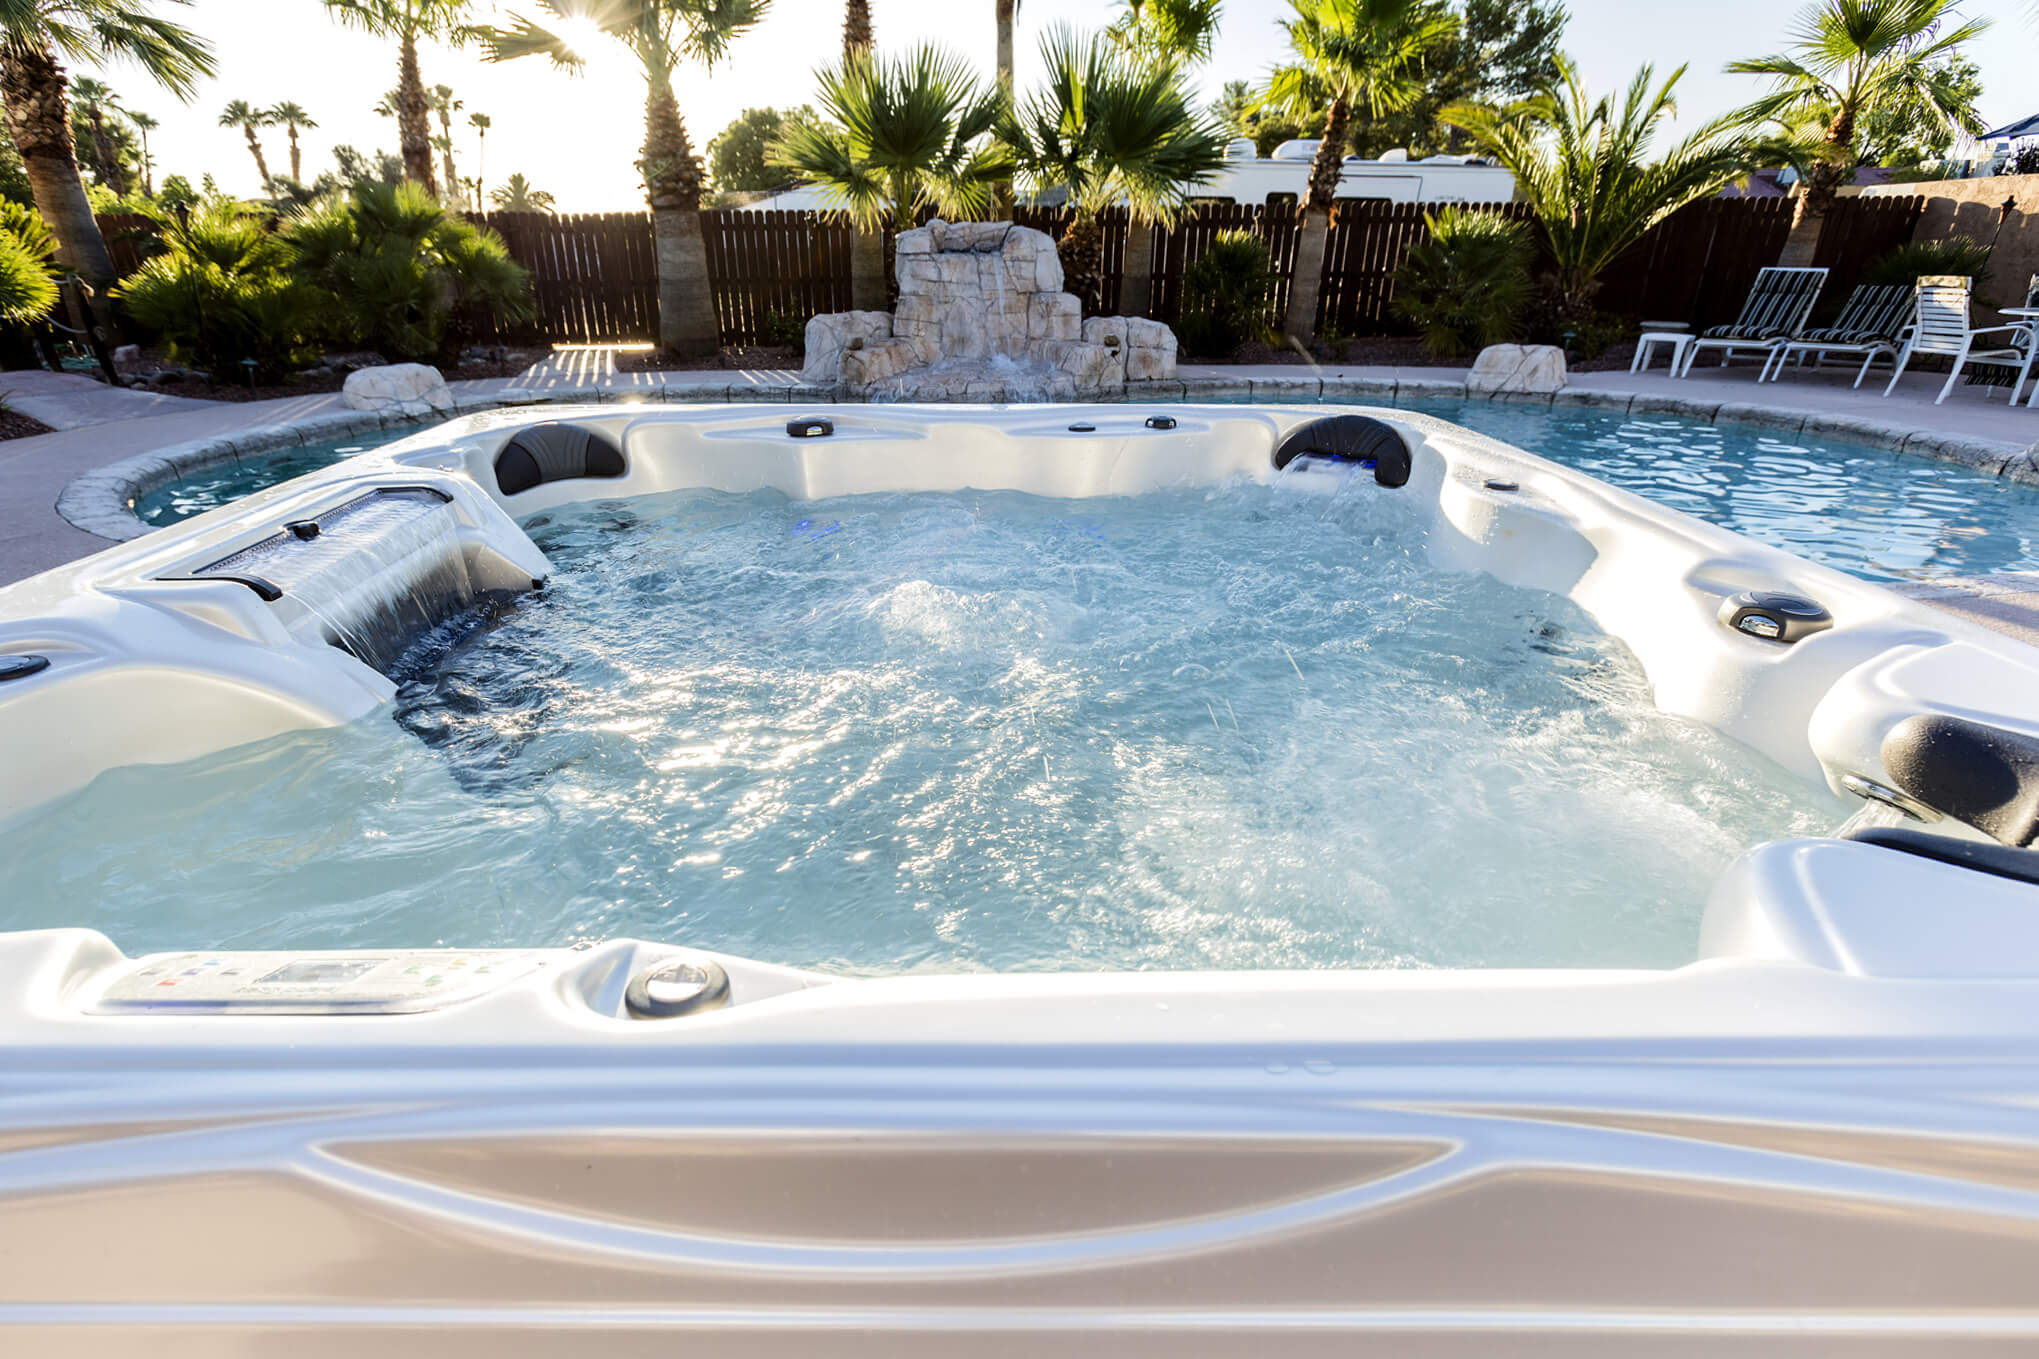 How Much Does a Hot Tub Weigh?